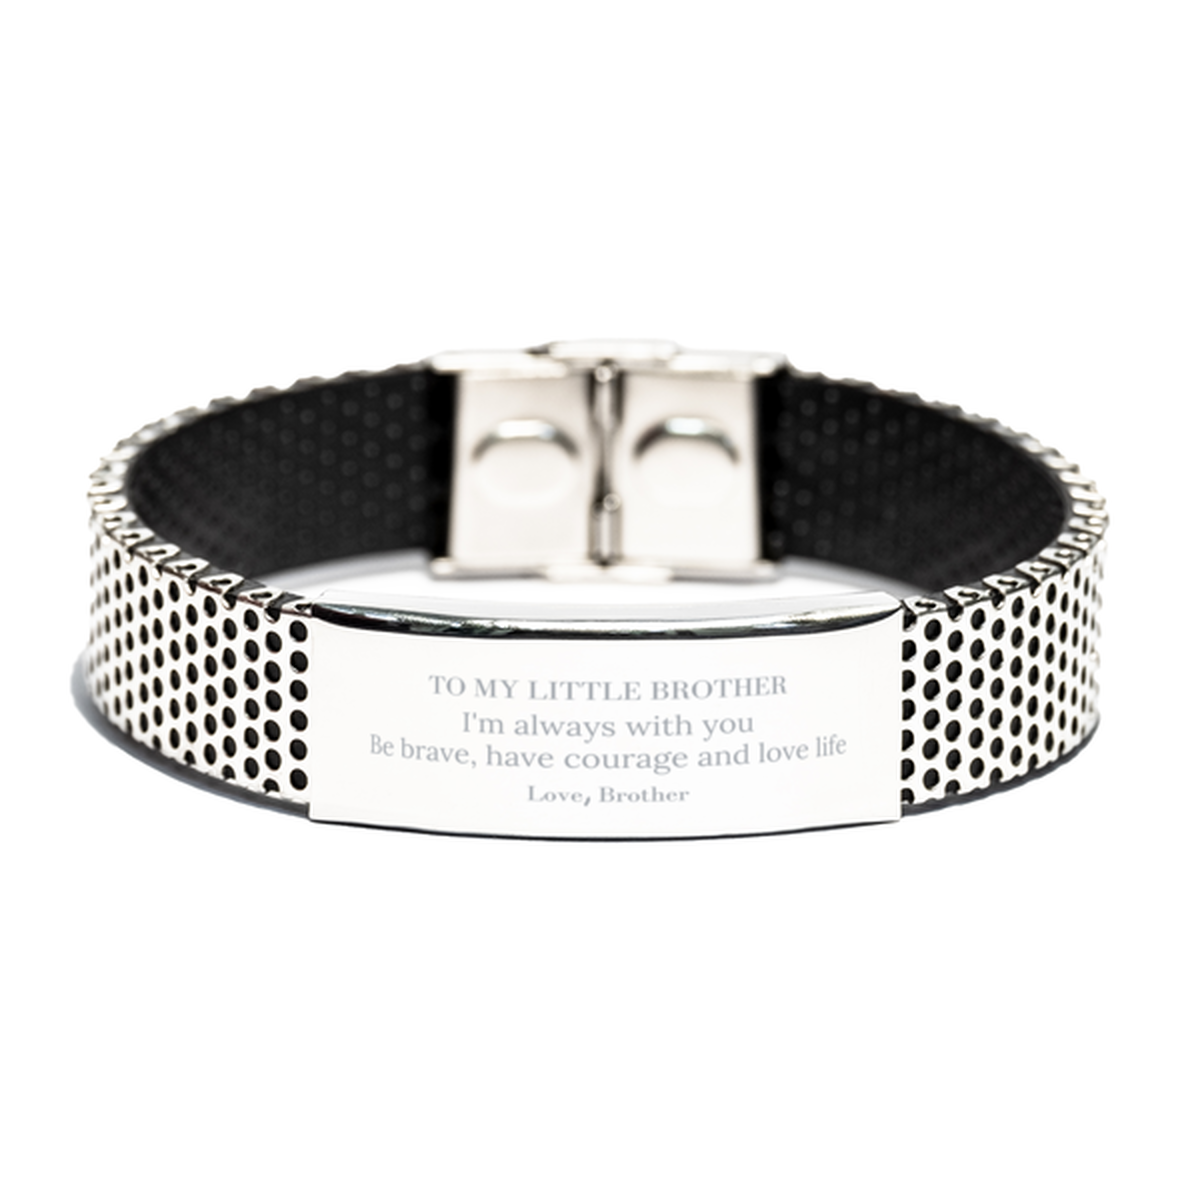 To My Little Brother Gifts from Brother, Unique Stainless Steel Bracelet Inspirational Christmas Birthday Graduation Gifts for Little Brother I'm always with you. Be brave, have courage and love life. Love, Brother